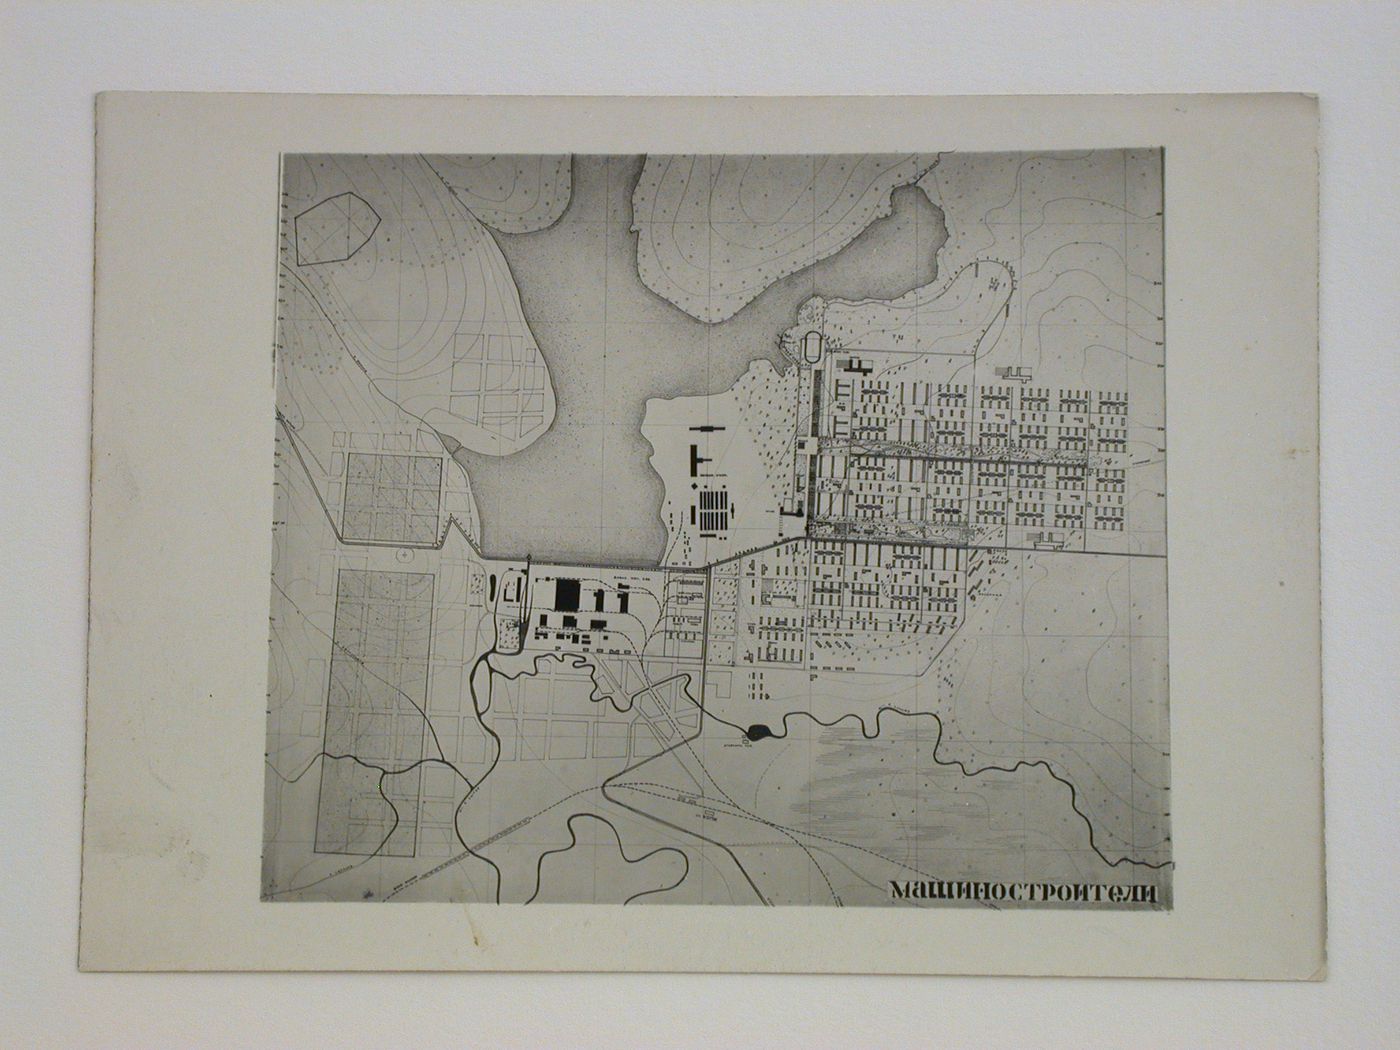 Photograph of a site plan for industrial housing and related services, Mashinostroiteli [?], Soviet Union (now in Russia)